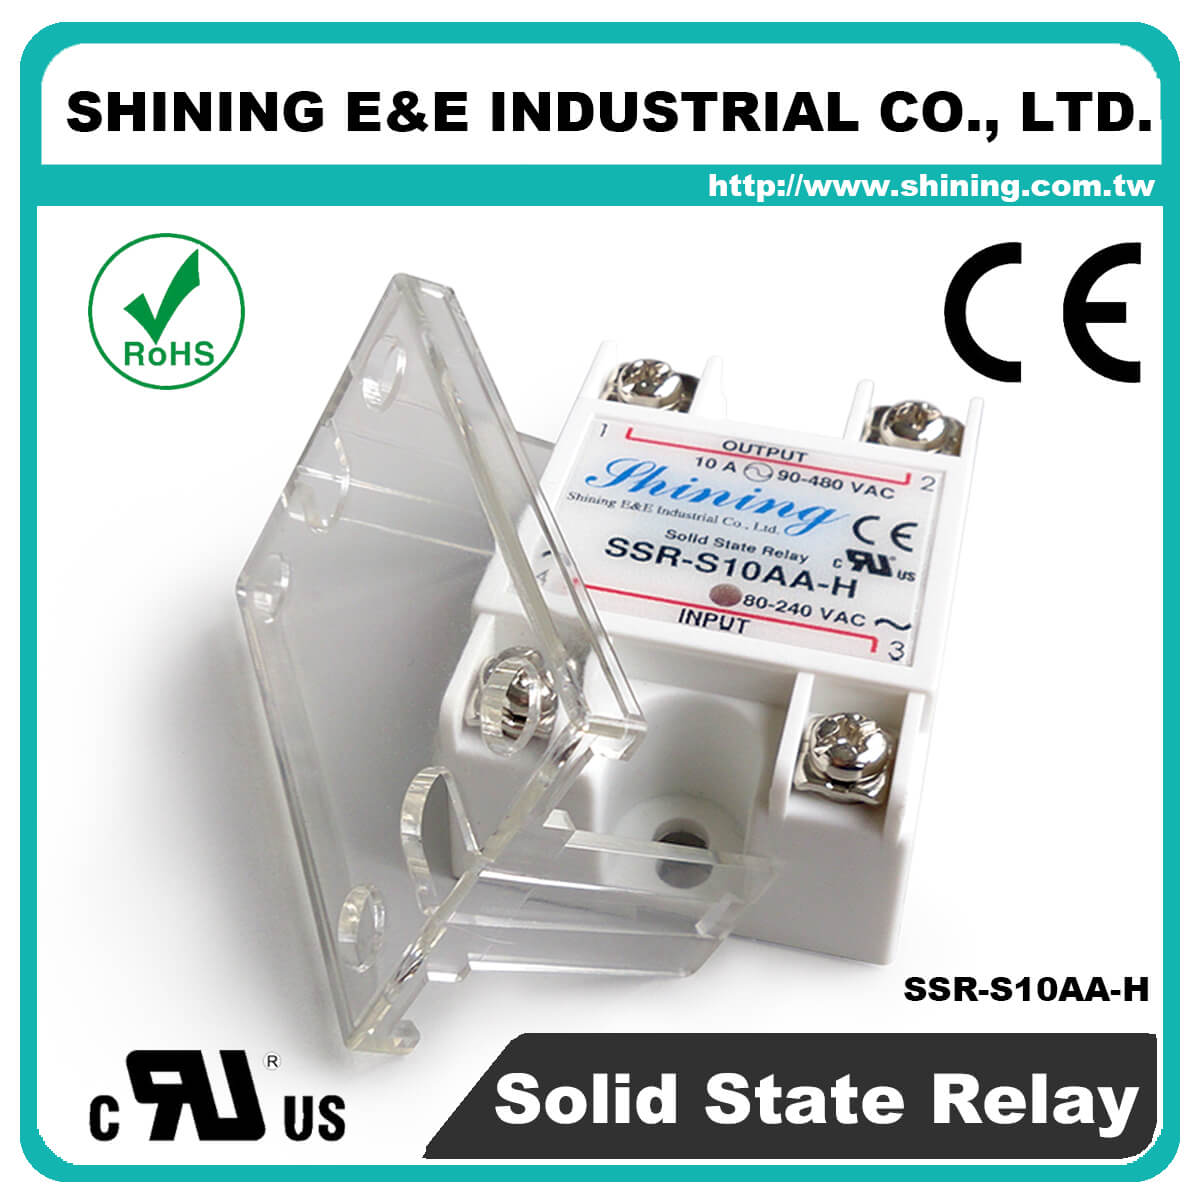 SSR-S10AA-H AC to AC 10A 480VAC Single Phase Solid State Relay